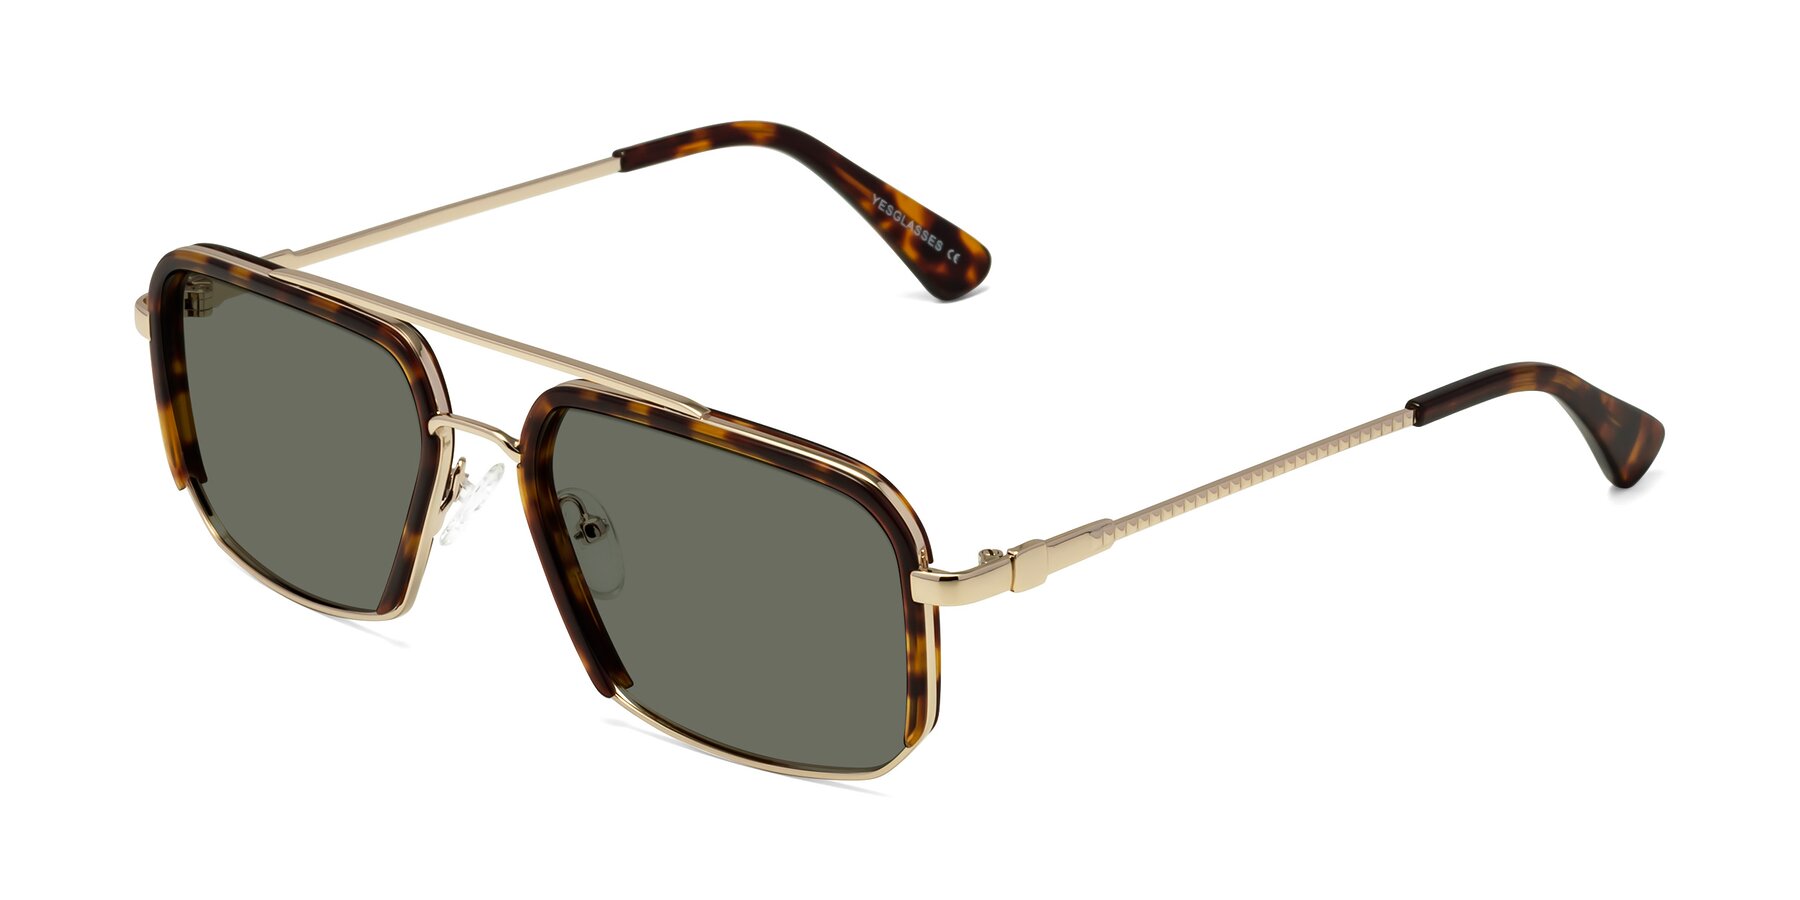 Angle of Dechter in Tortoise-Gold with Gray Polarized Lenses